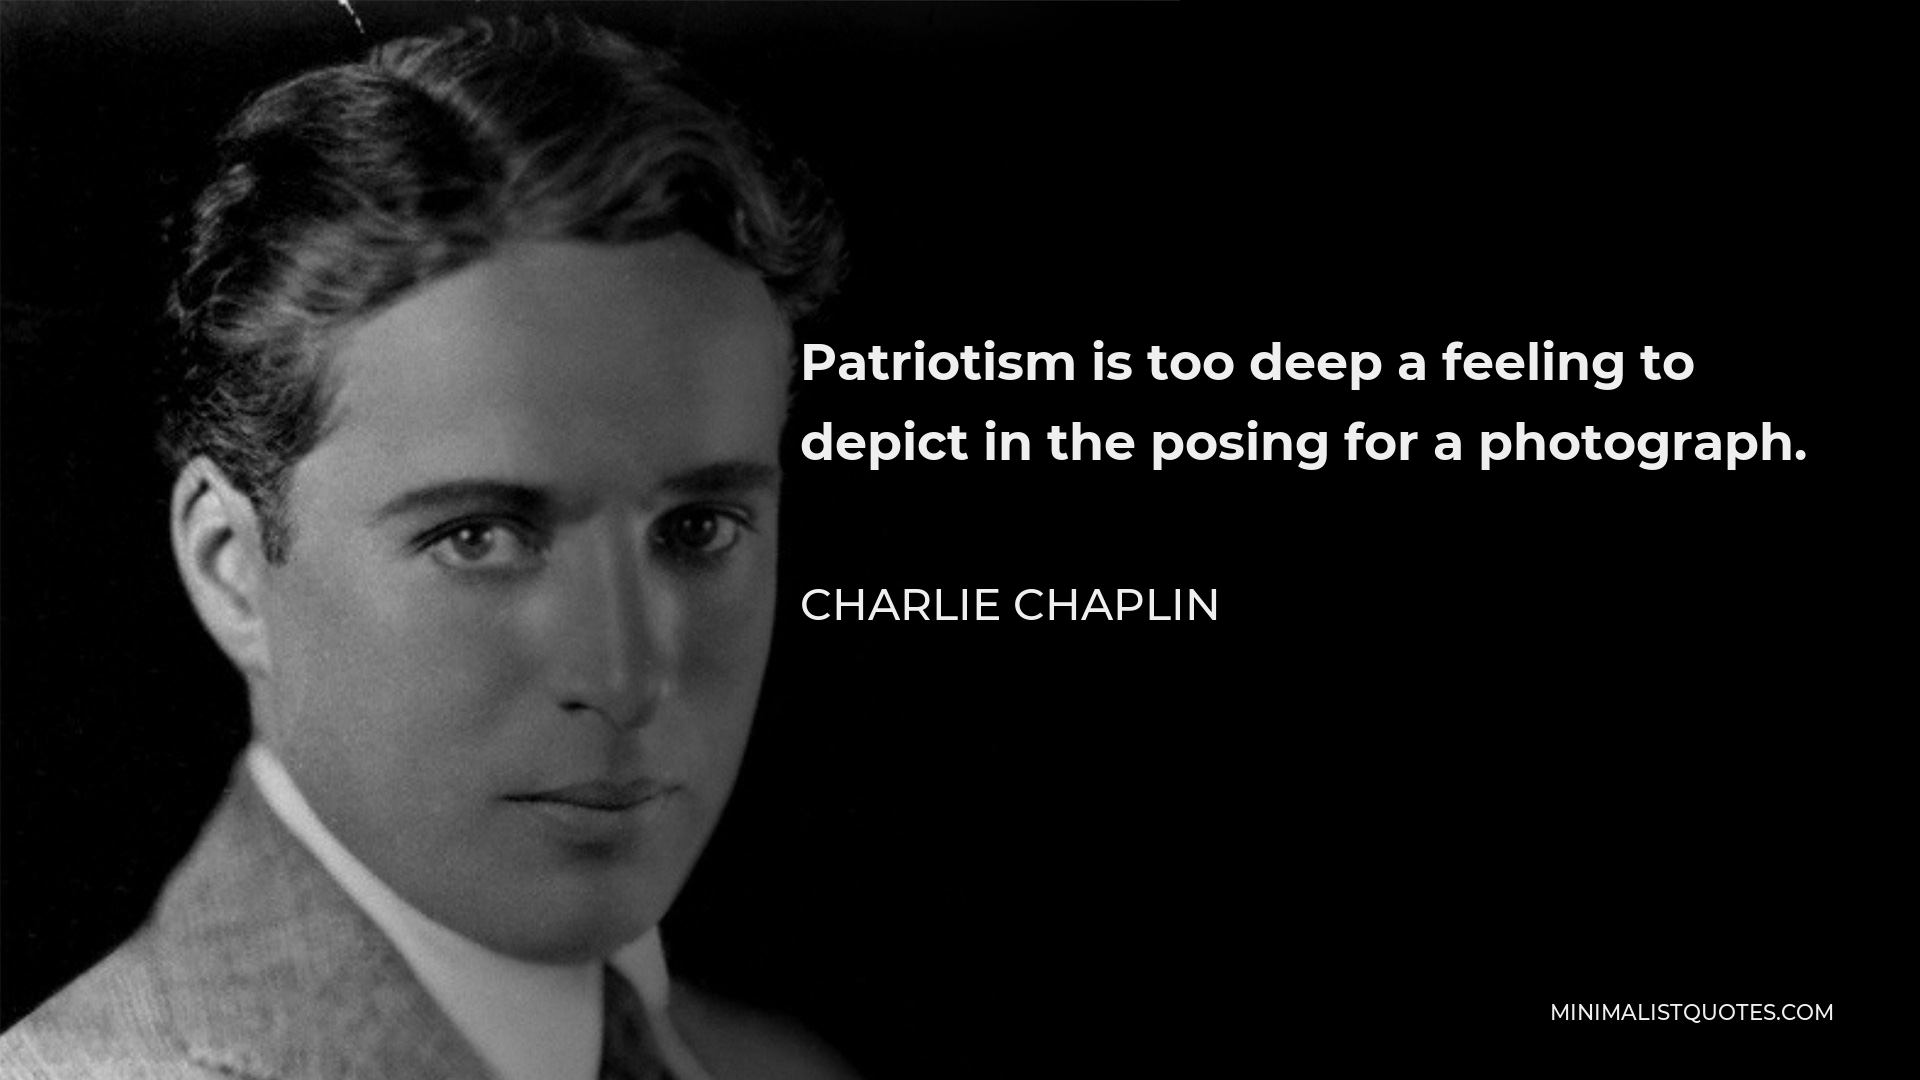 Charlie Chaplin Quote: Patriotism is too deep a feeling to depict in ...